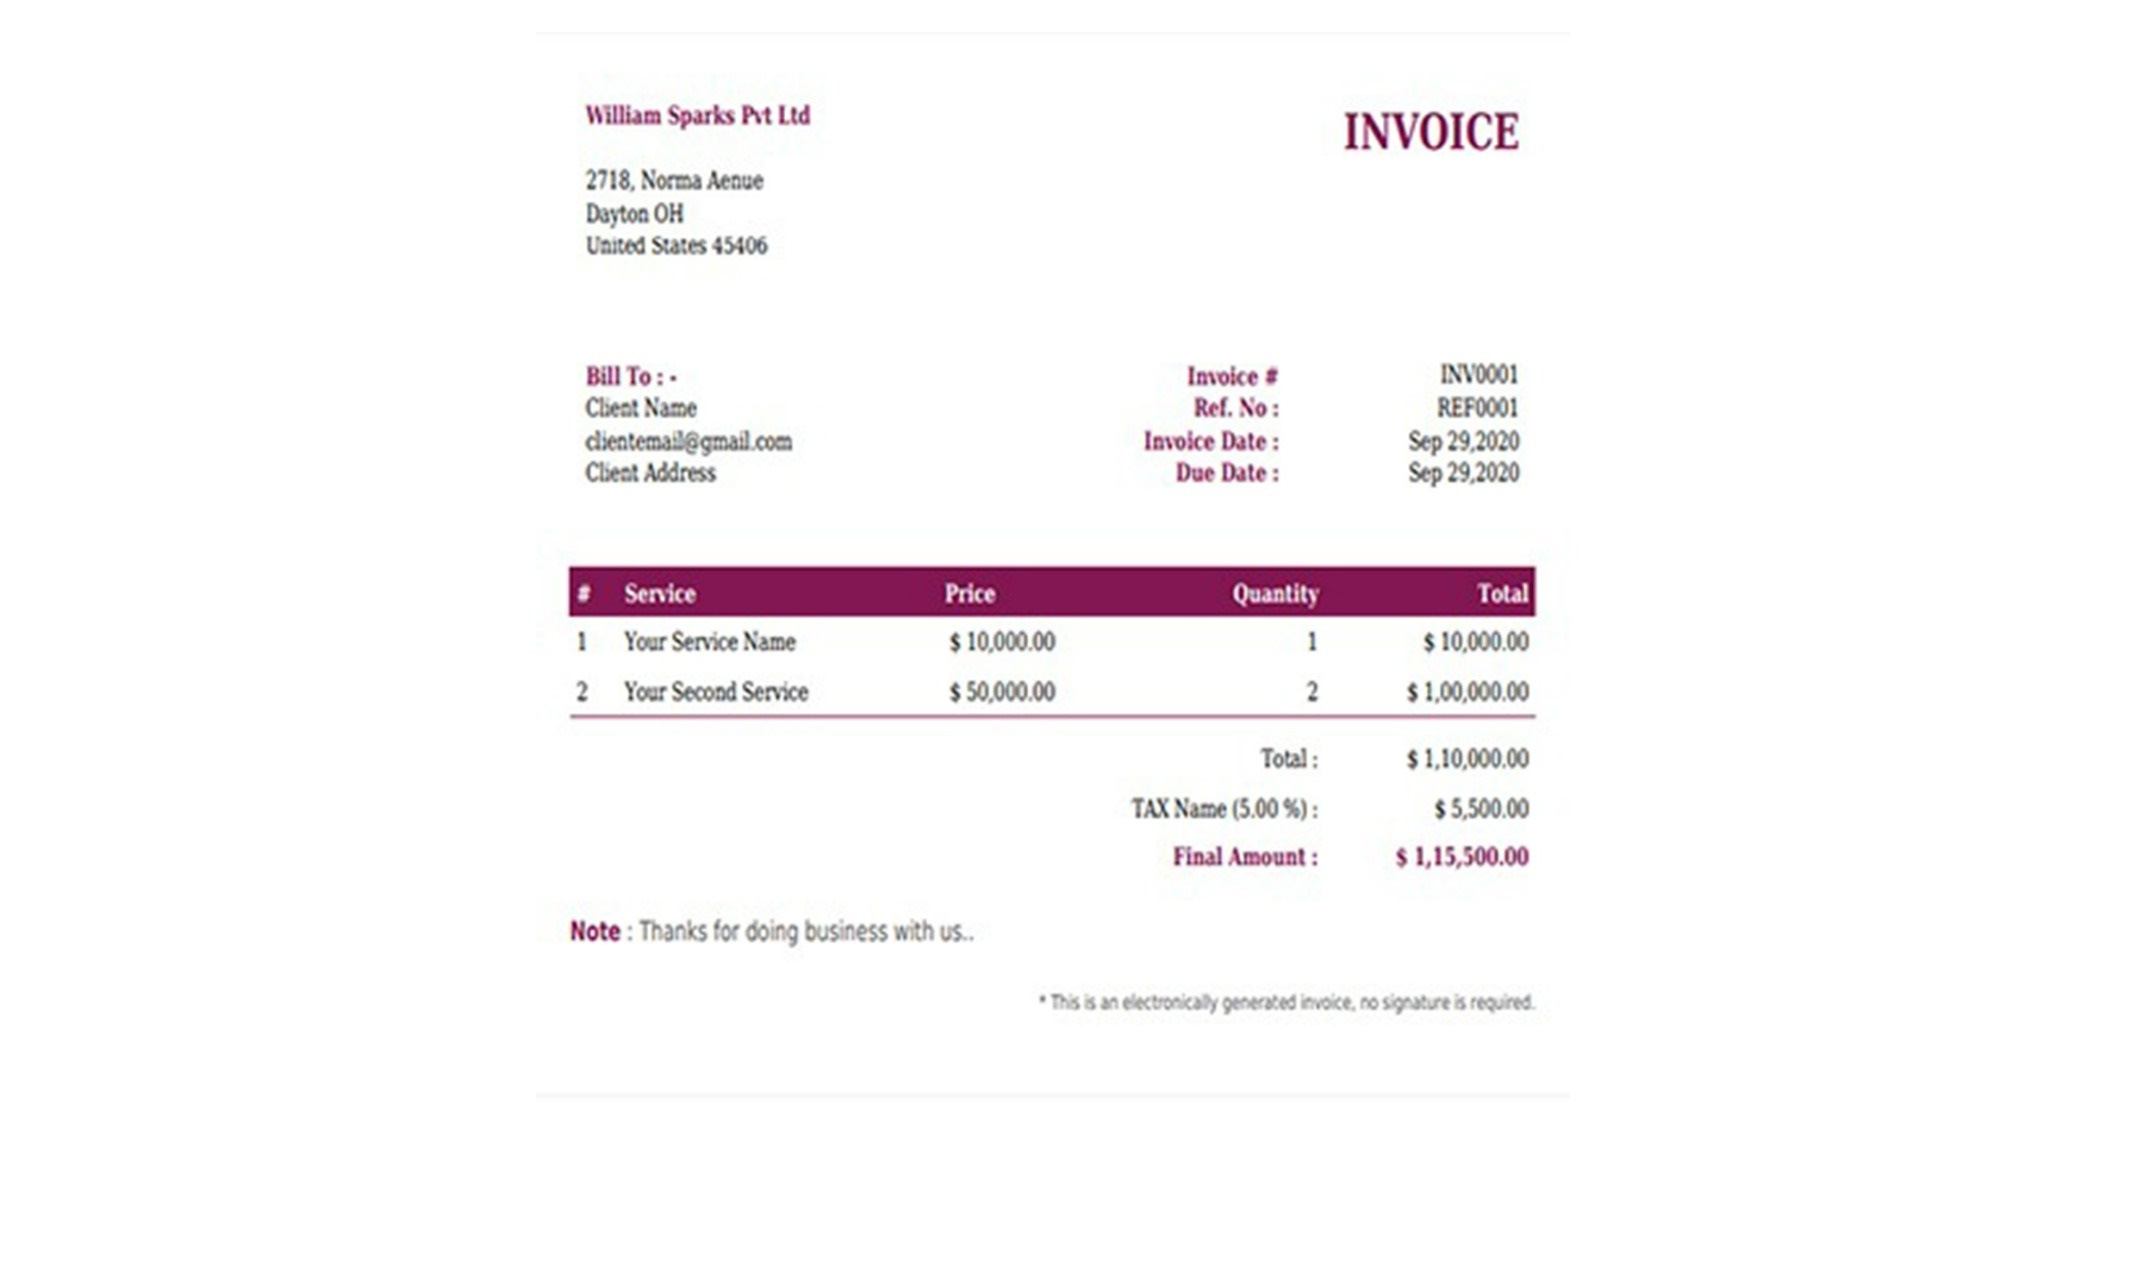 Find detailed information about Orkst Invoice